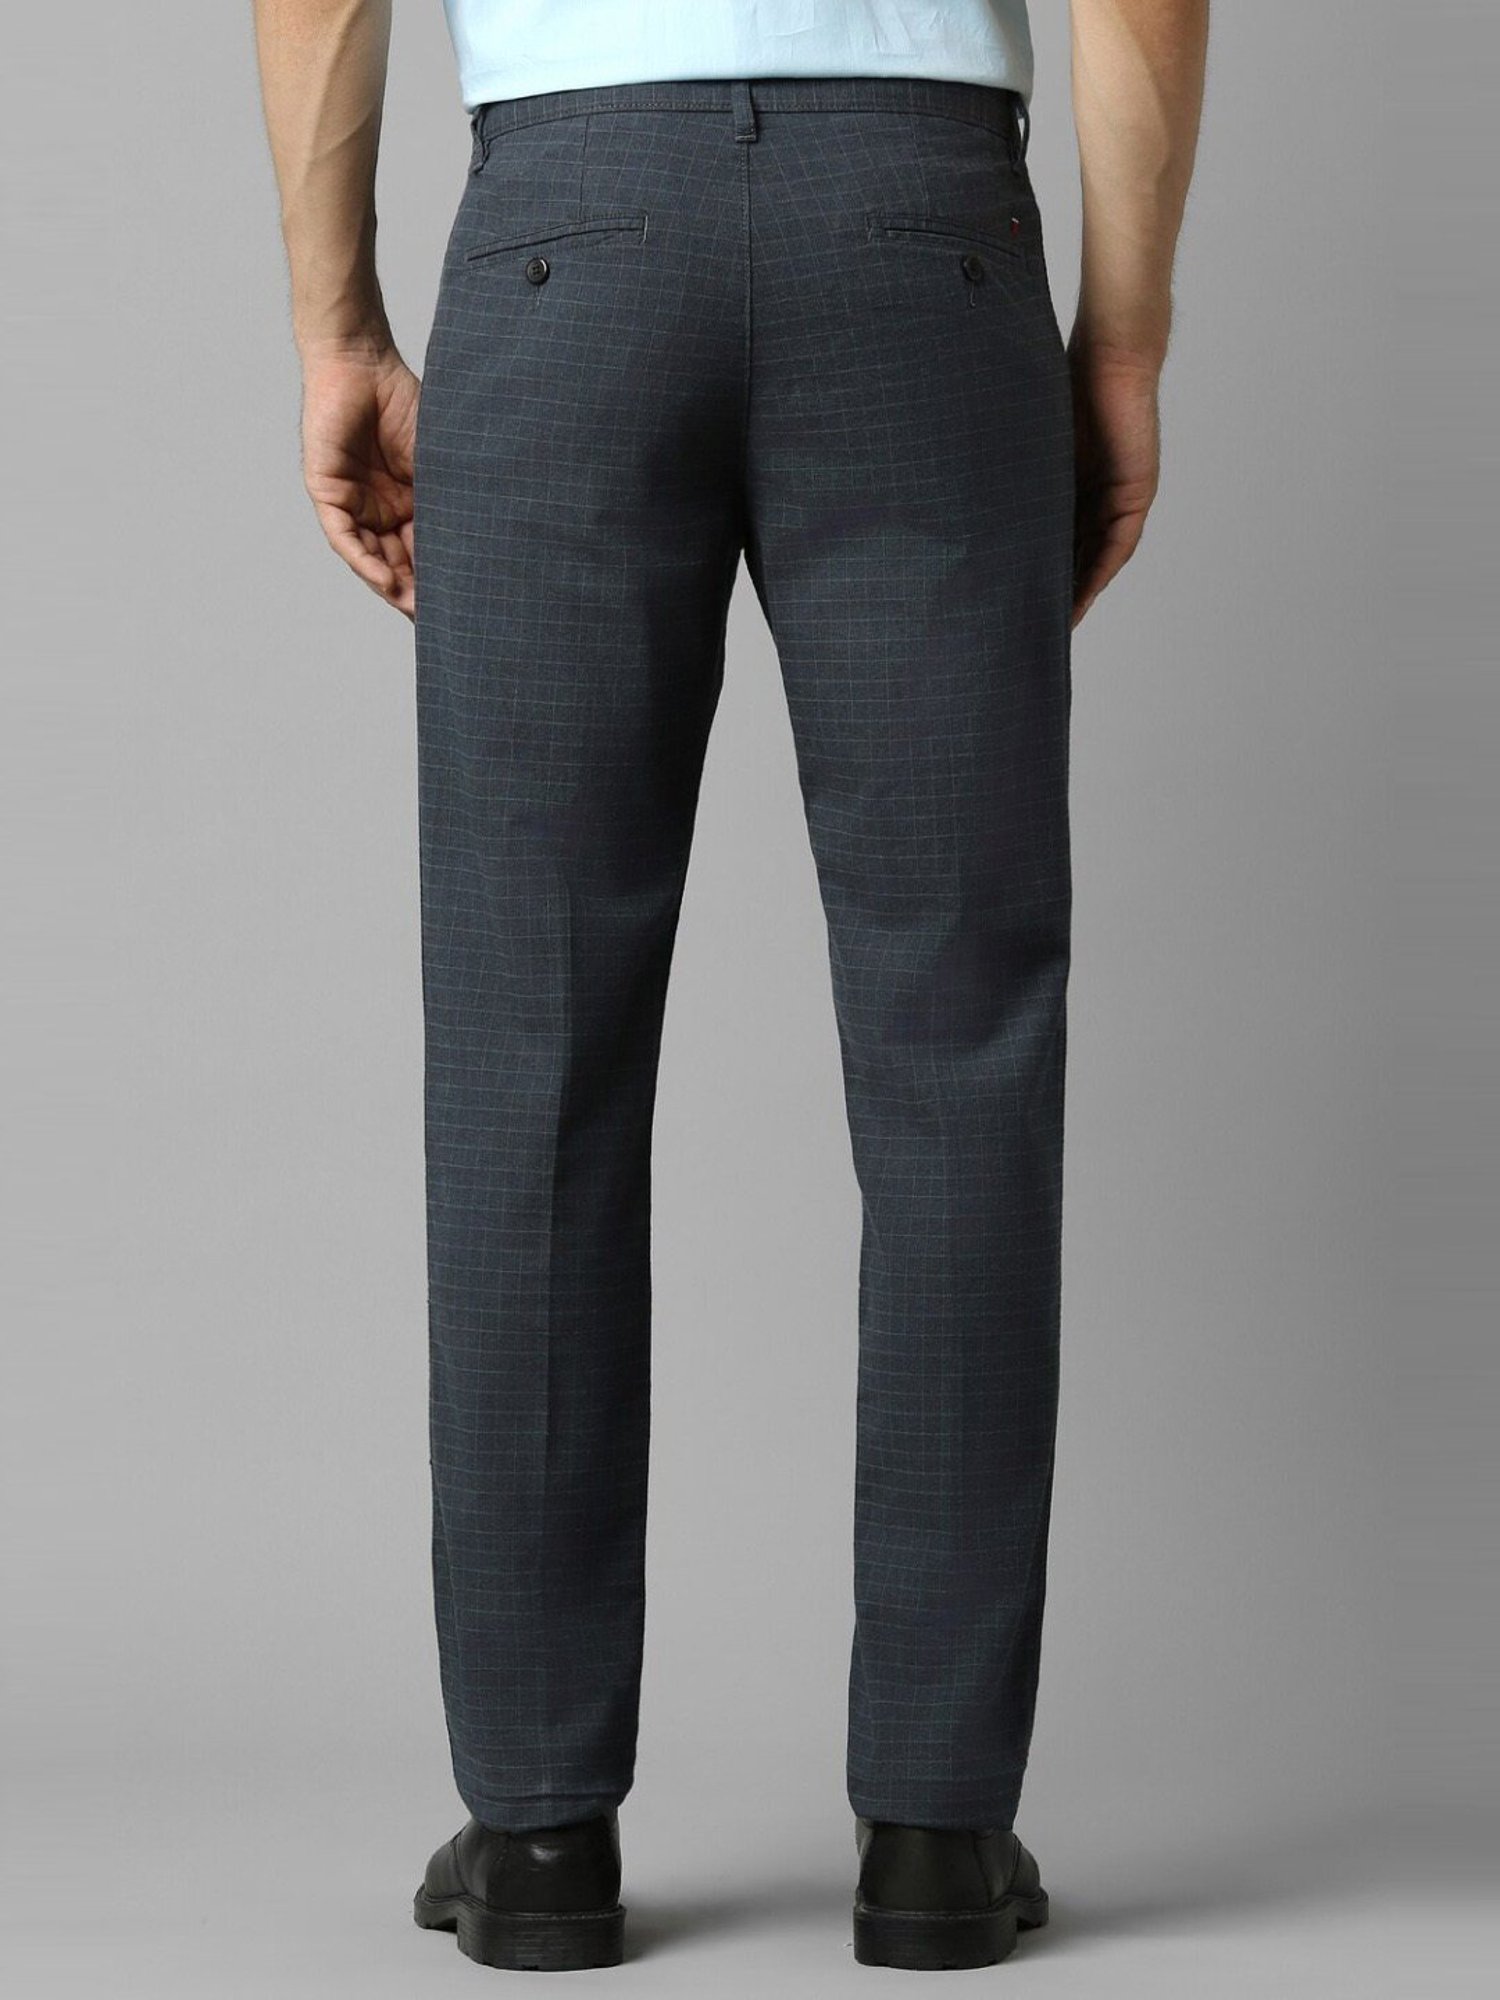 Louis Philippe Printed Trousers outlet  1800 products on sale   FASHIOLAcouk